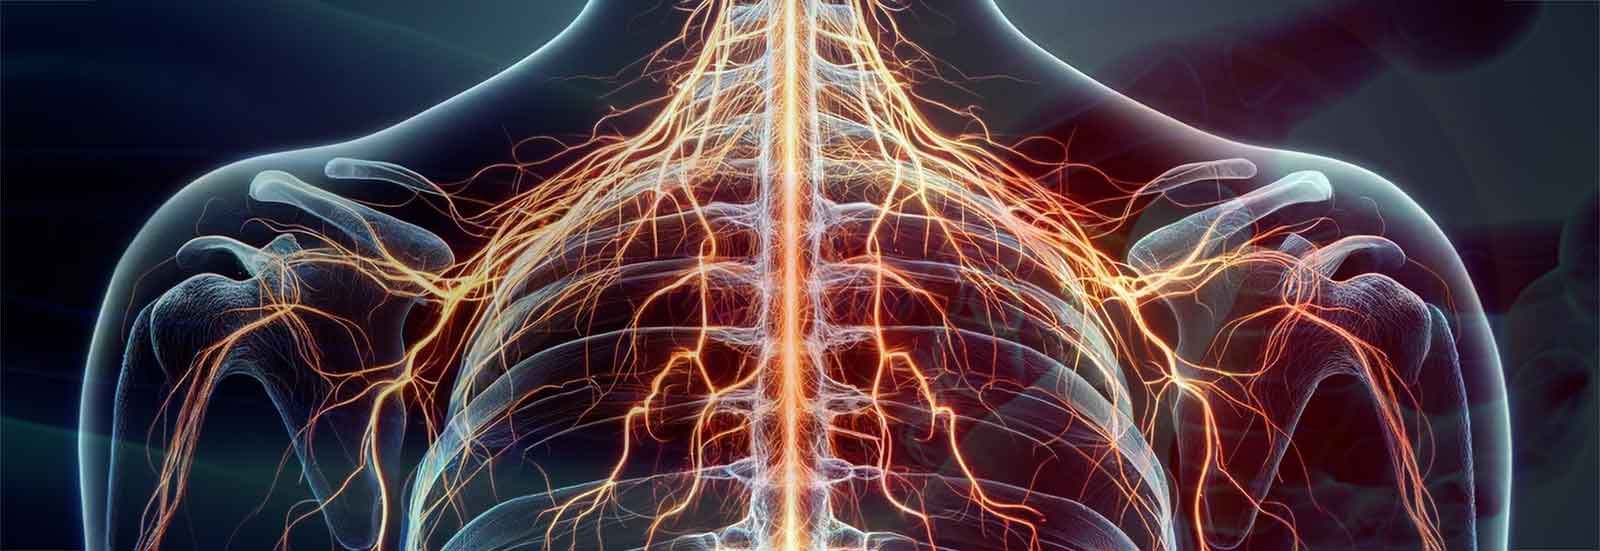 How to Tell if It's a Pinched Nerve or Pulled Muscle: Symptoms, Diagnosis, and Treatment